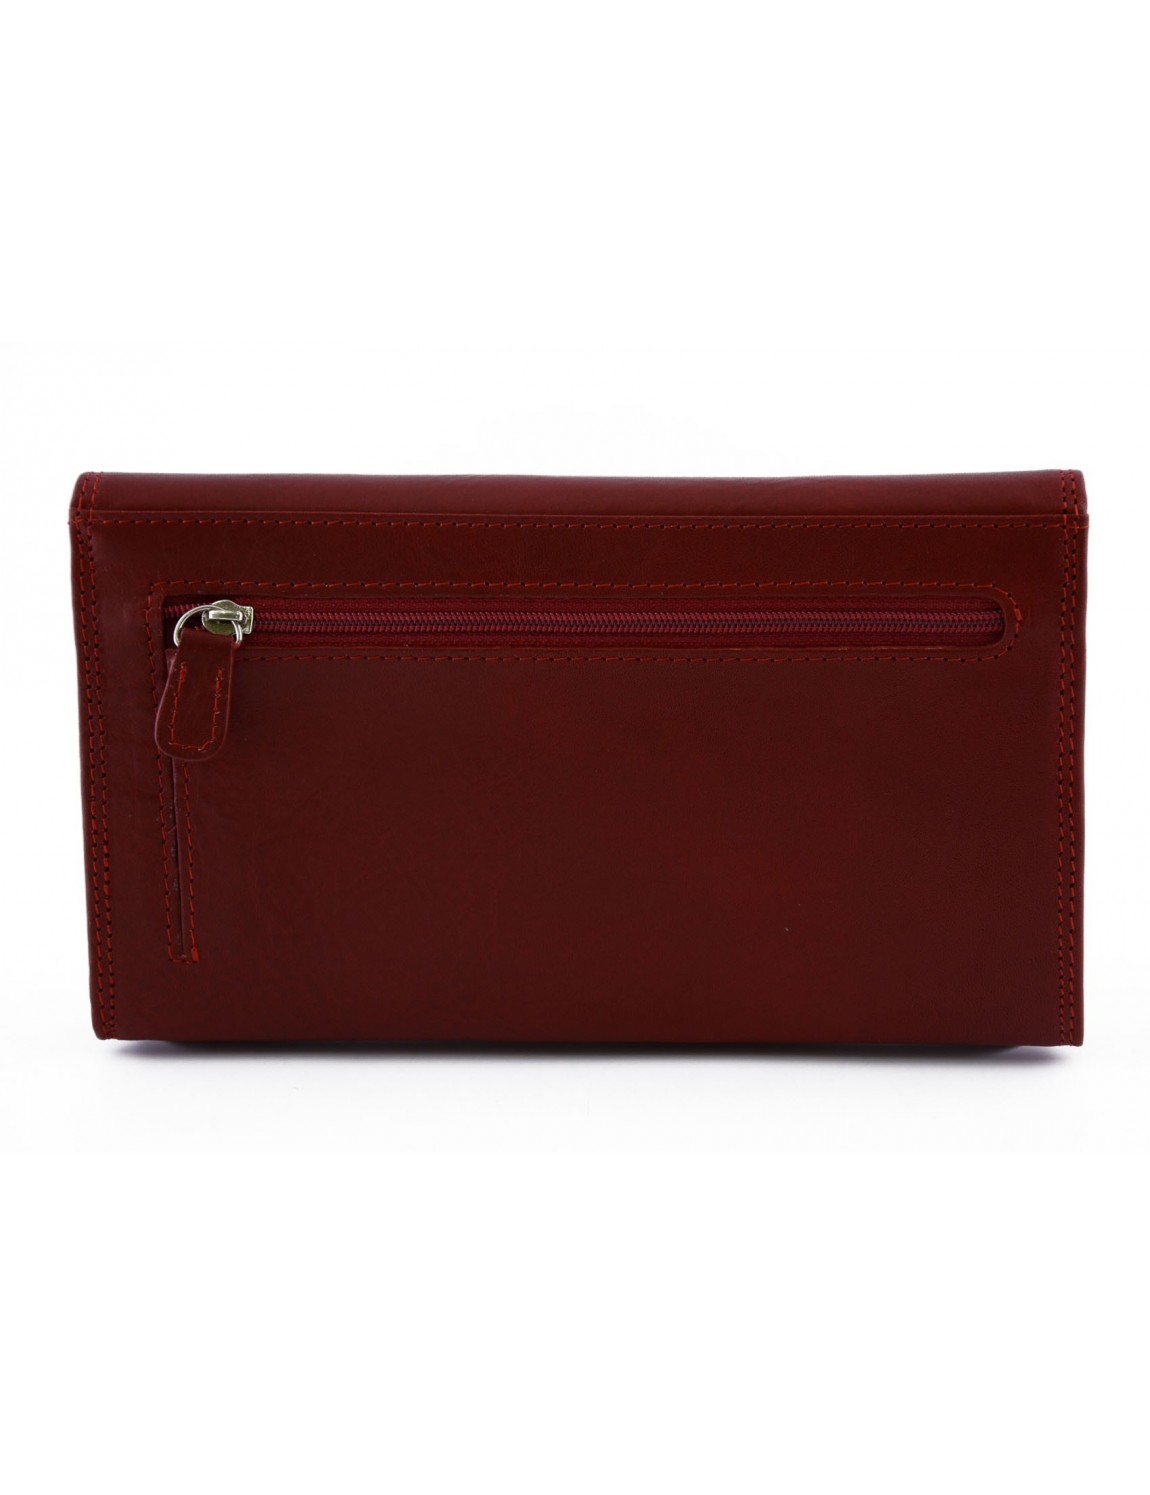 Genuine Leather Multi-compartment Wallet for Woman - Shirley